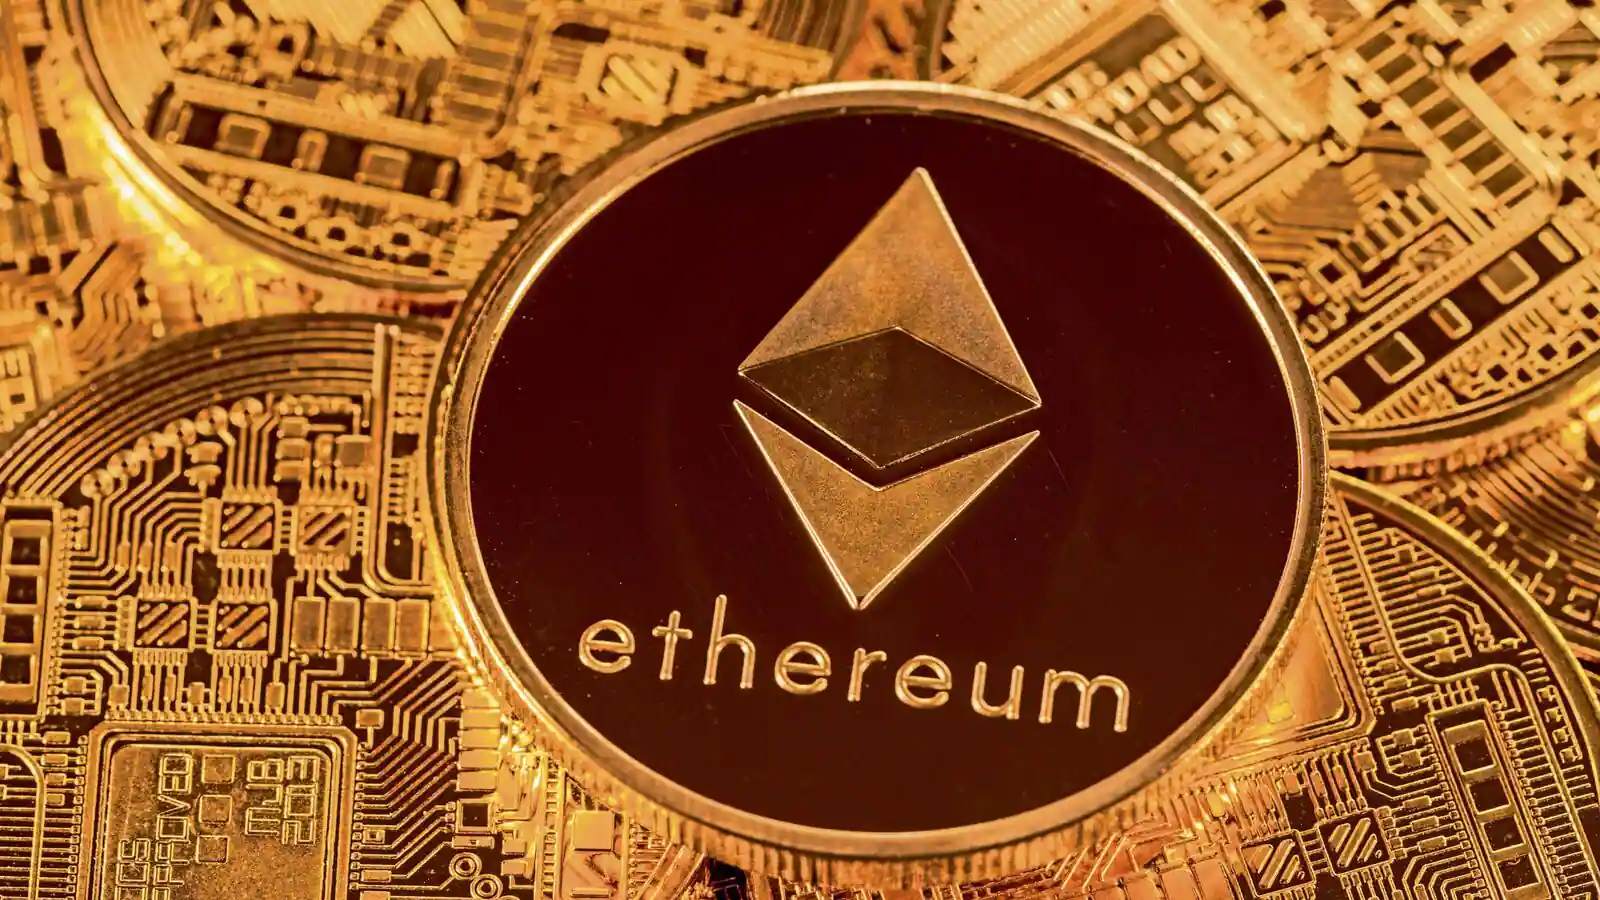 Etherium Crypto Currency